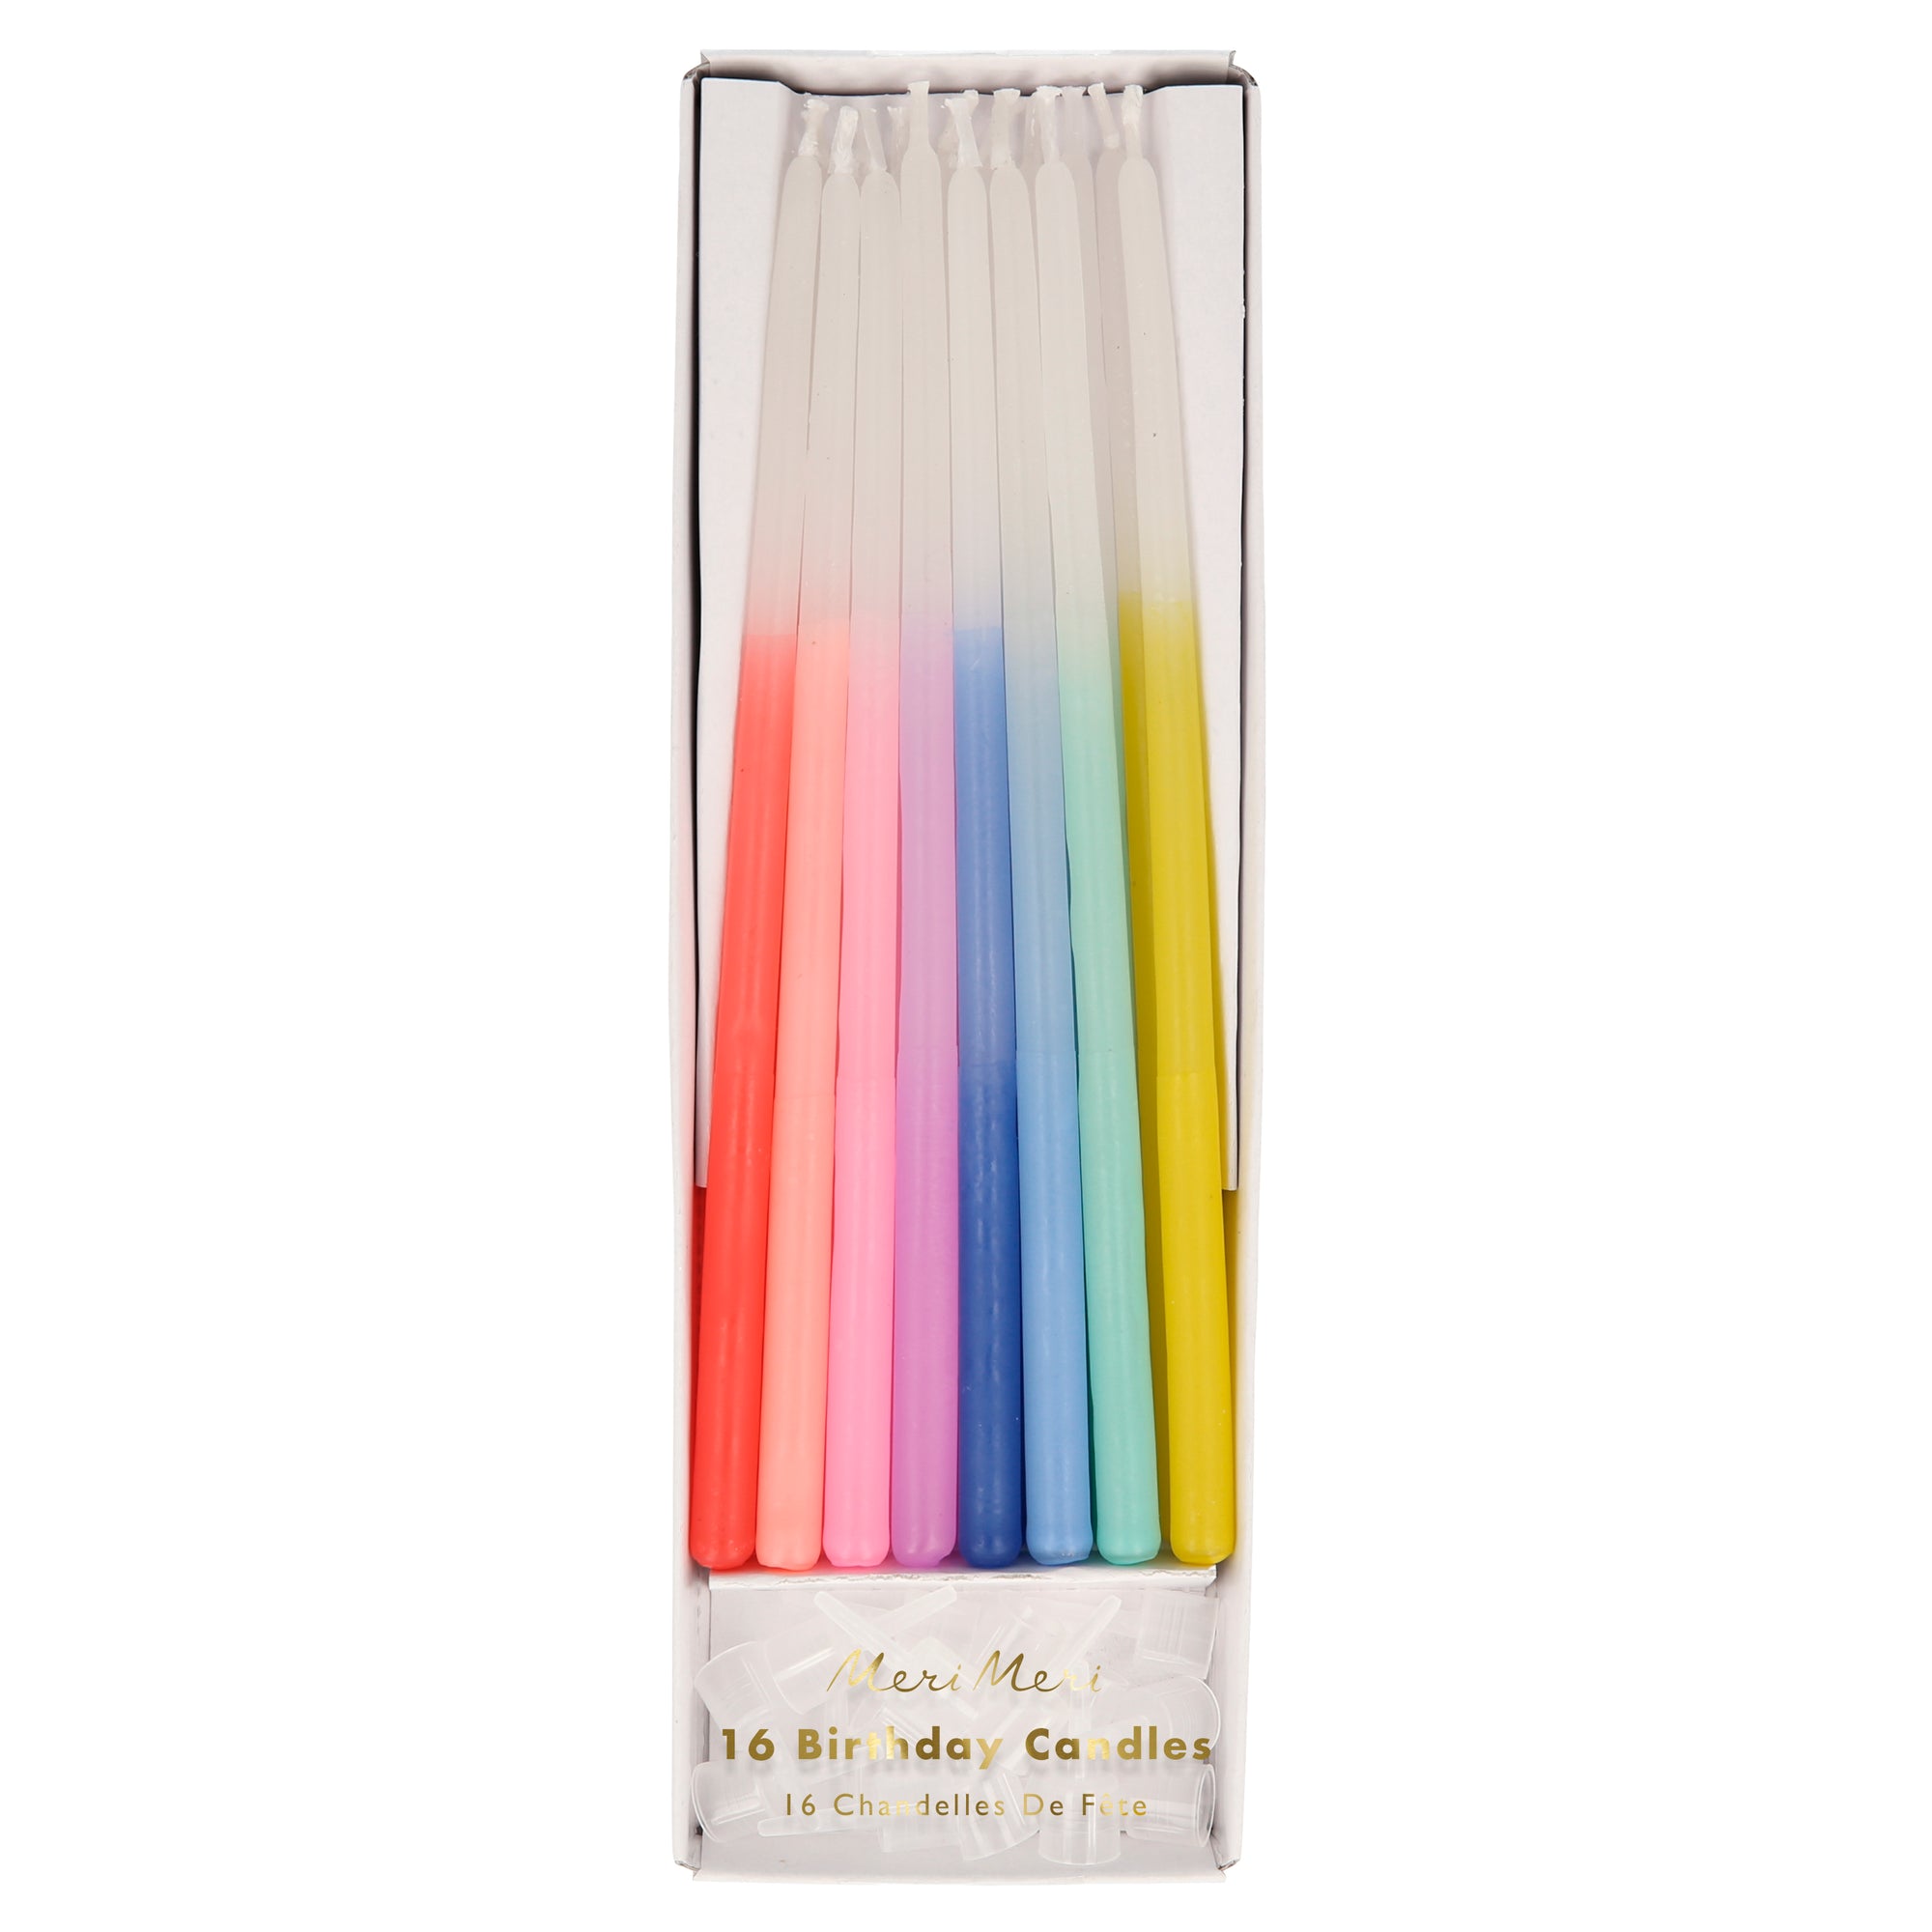 Rainbow tapered birthday candles-Little Fish Co.